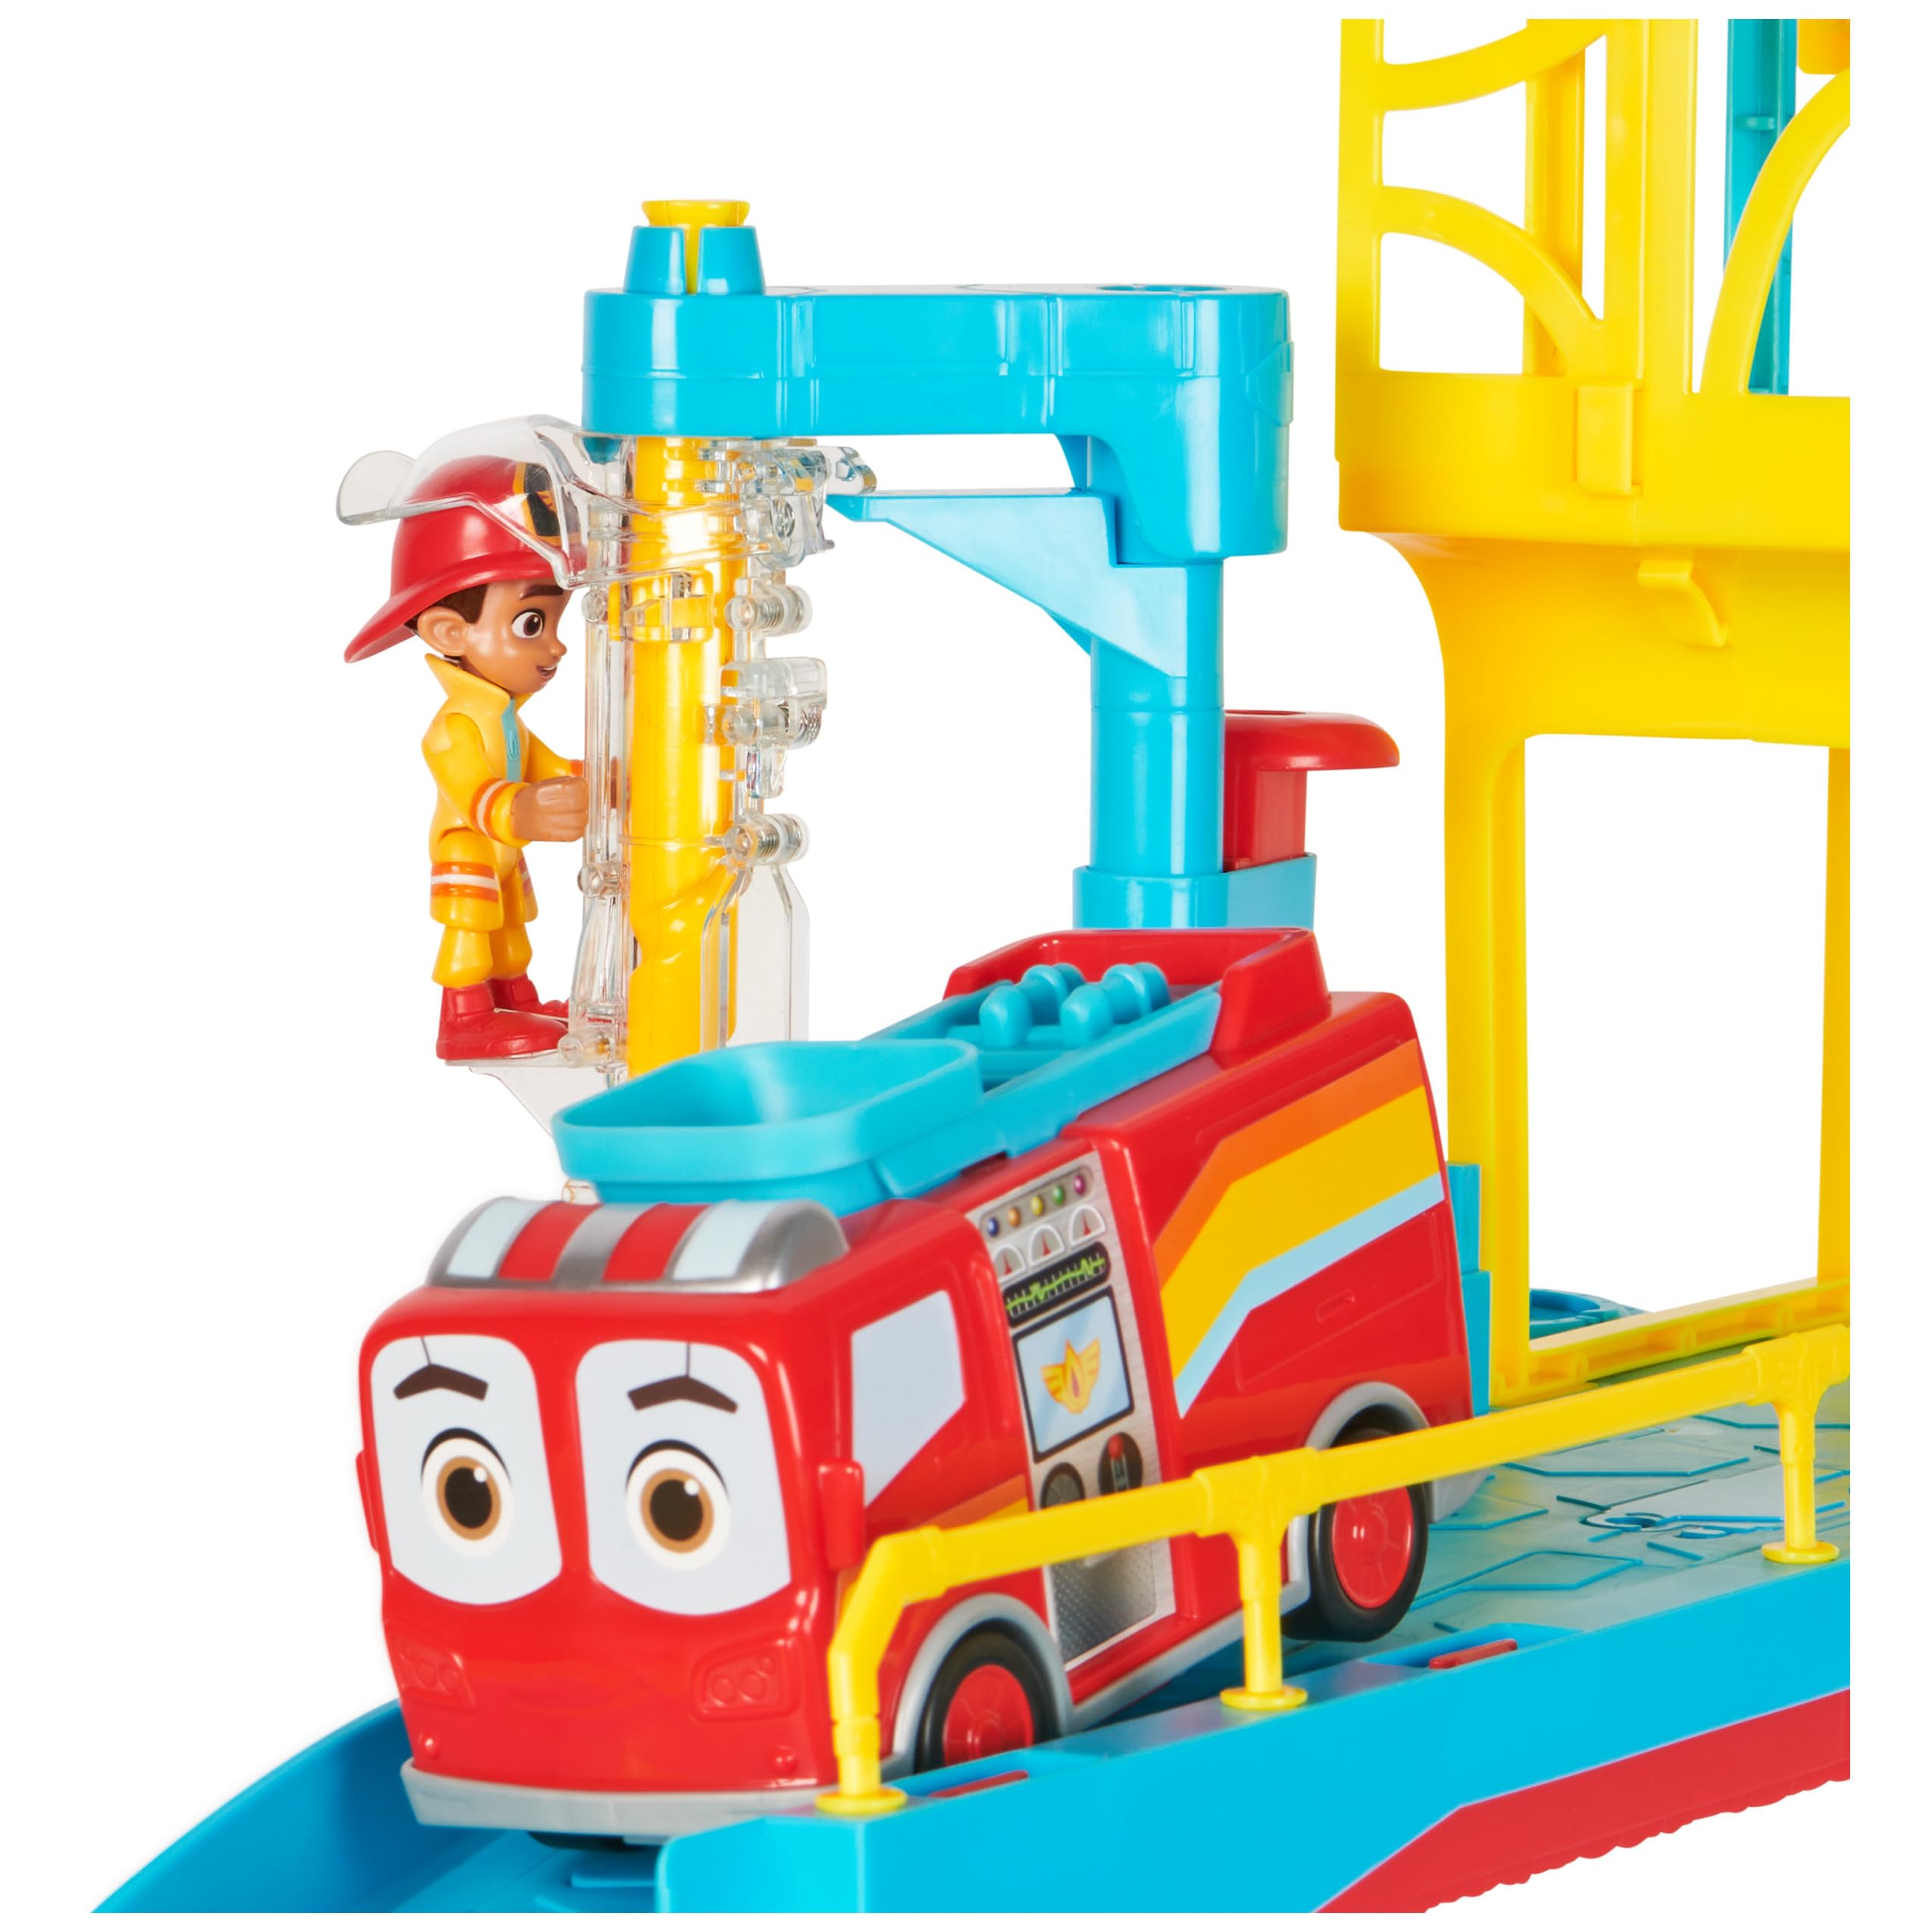 Disney Junior Firebuds HQ Playset with Lights, Sounds, Fire Truck Toy, Action Figure and Vehicle Launcher, Kids Toys for Boys and Girls Ages 3 and Up